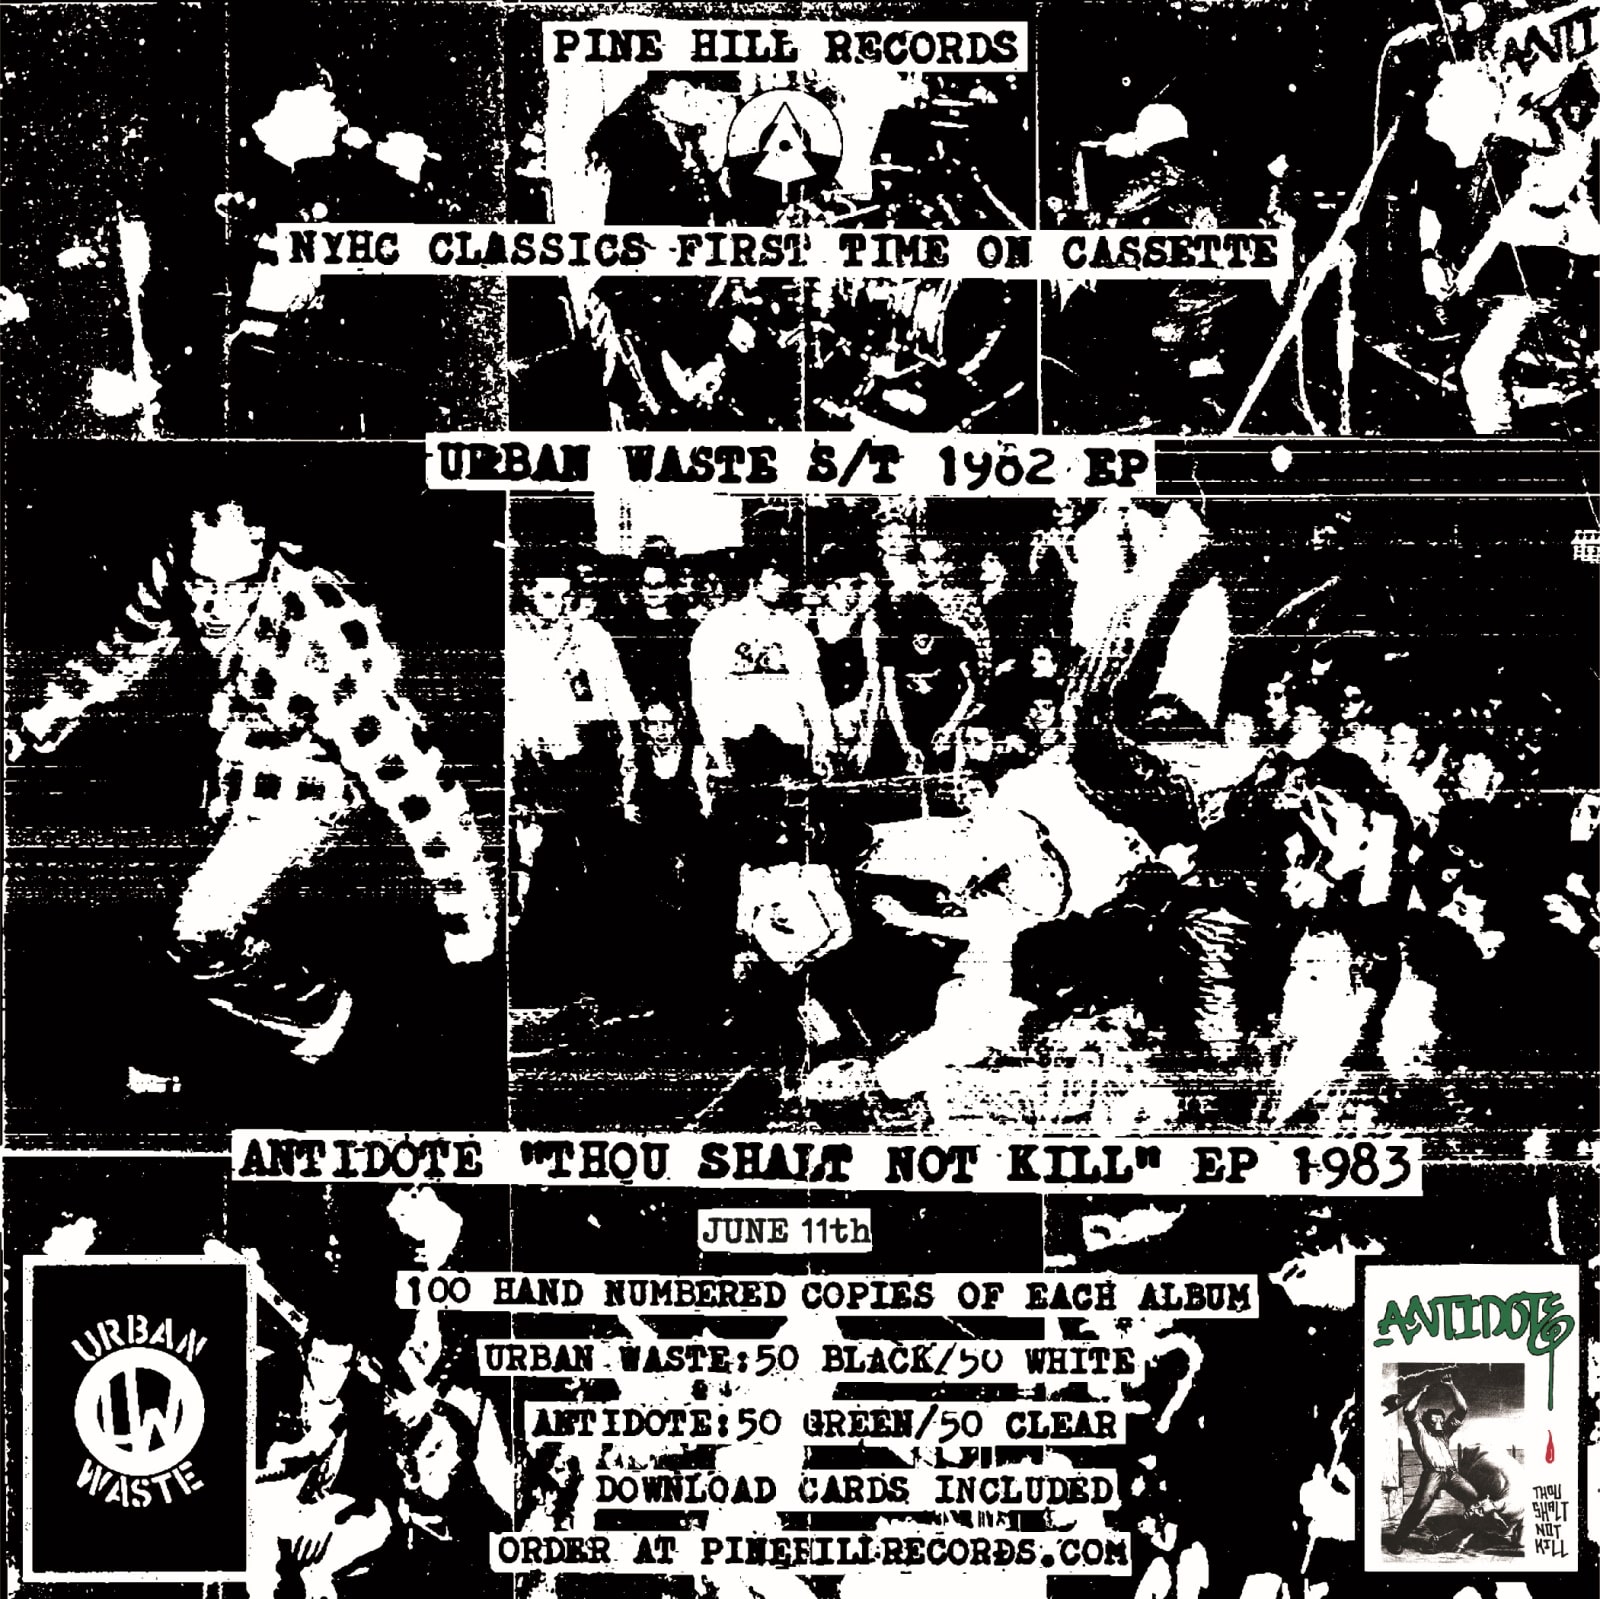 Pine Hill Records NYHC